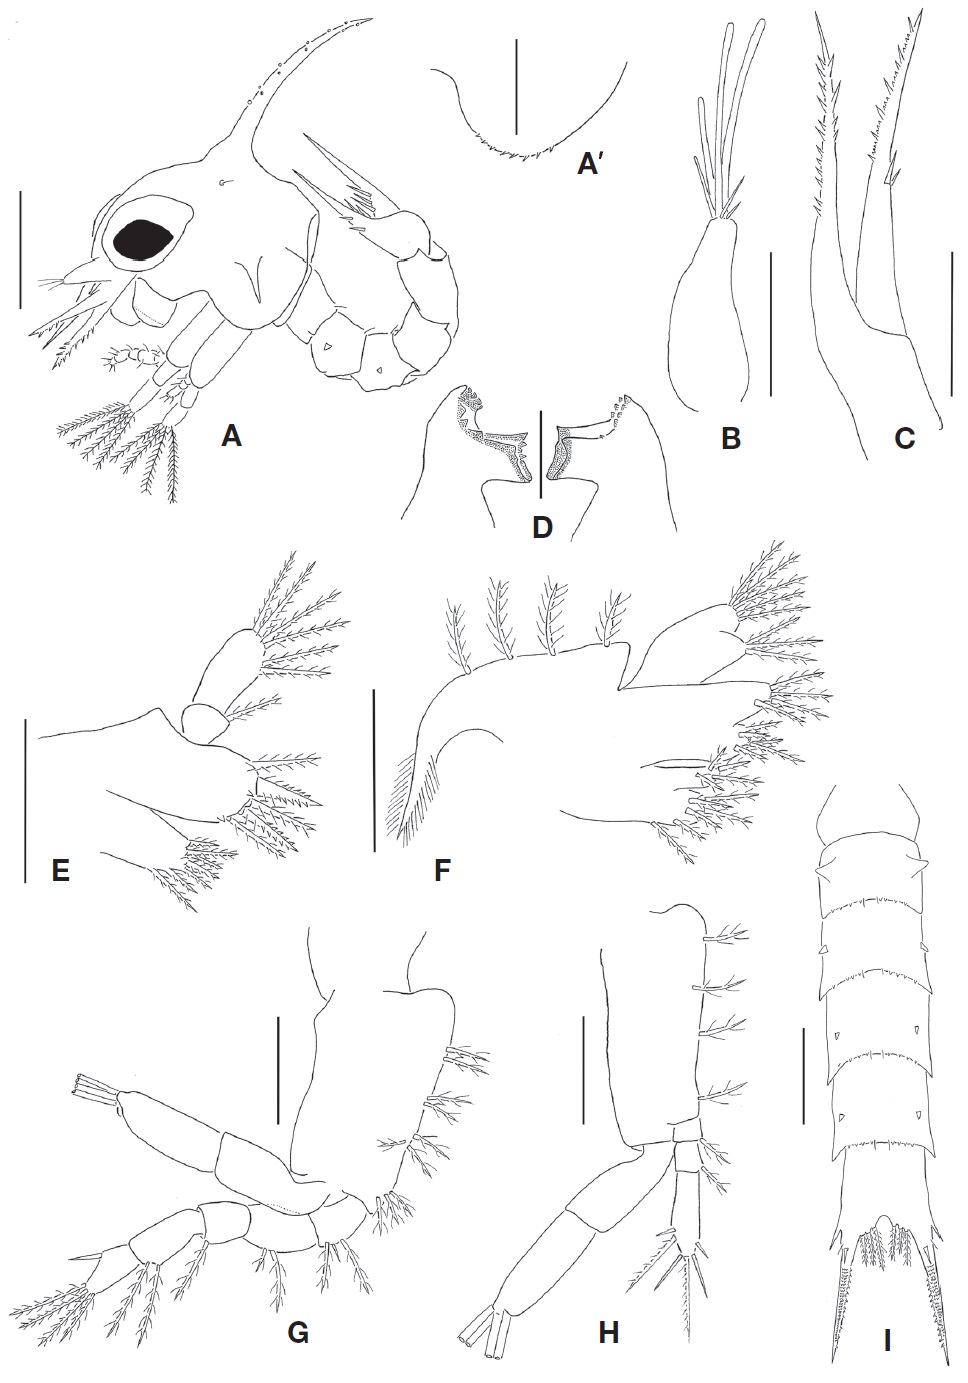 Halimede fragifer, first zoeal stage. A, Lateral view; A', Lateral expansion of carapace; B, Antennule; C, Antenna; D, Mandibles; E, Maxillule; F, Maxilla; G, First maxilliped; H, Second maxilliped; I, Dorsal view of abdomen and telson. Scale bars: A=0.3 mm, I=0.2 mm, A', B-H=0.1 mm.